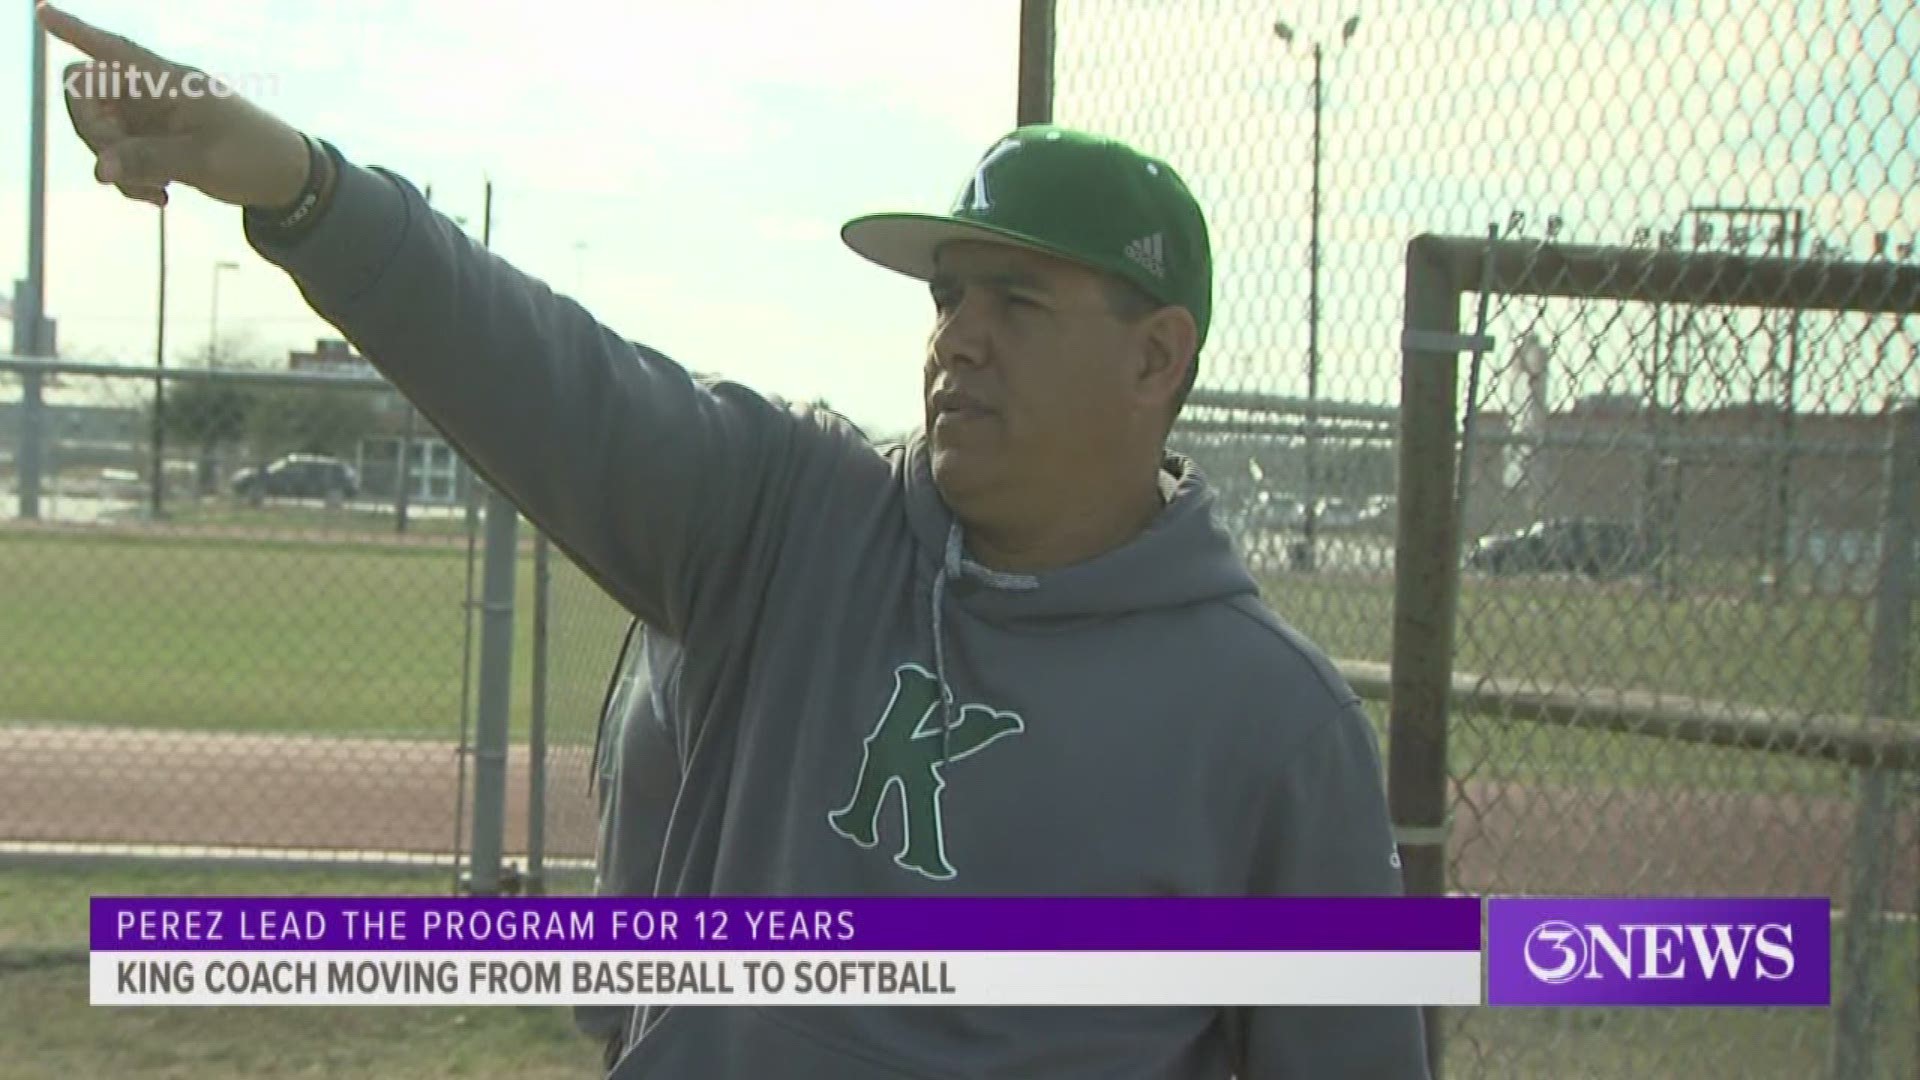 Perez lead the Mustangs for 12 years, and reached the third round six different times in that stretch. He's set to become an assistant for the softball program.